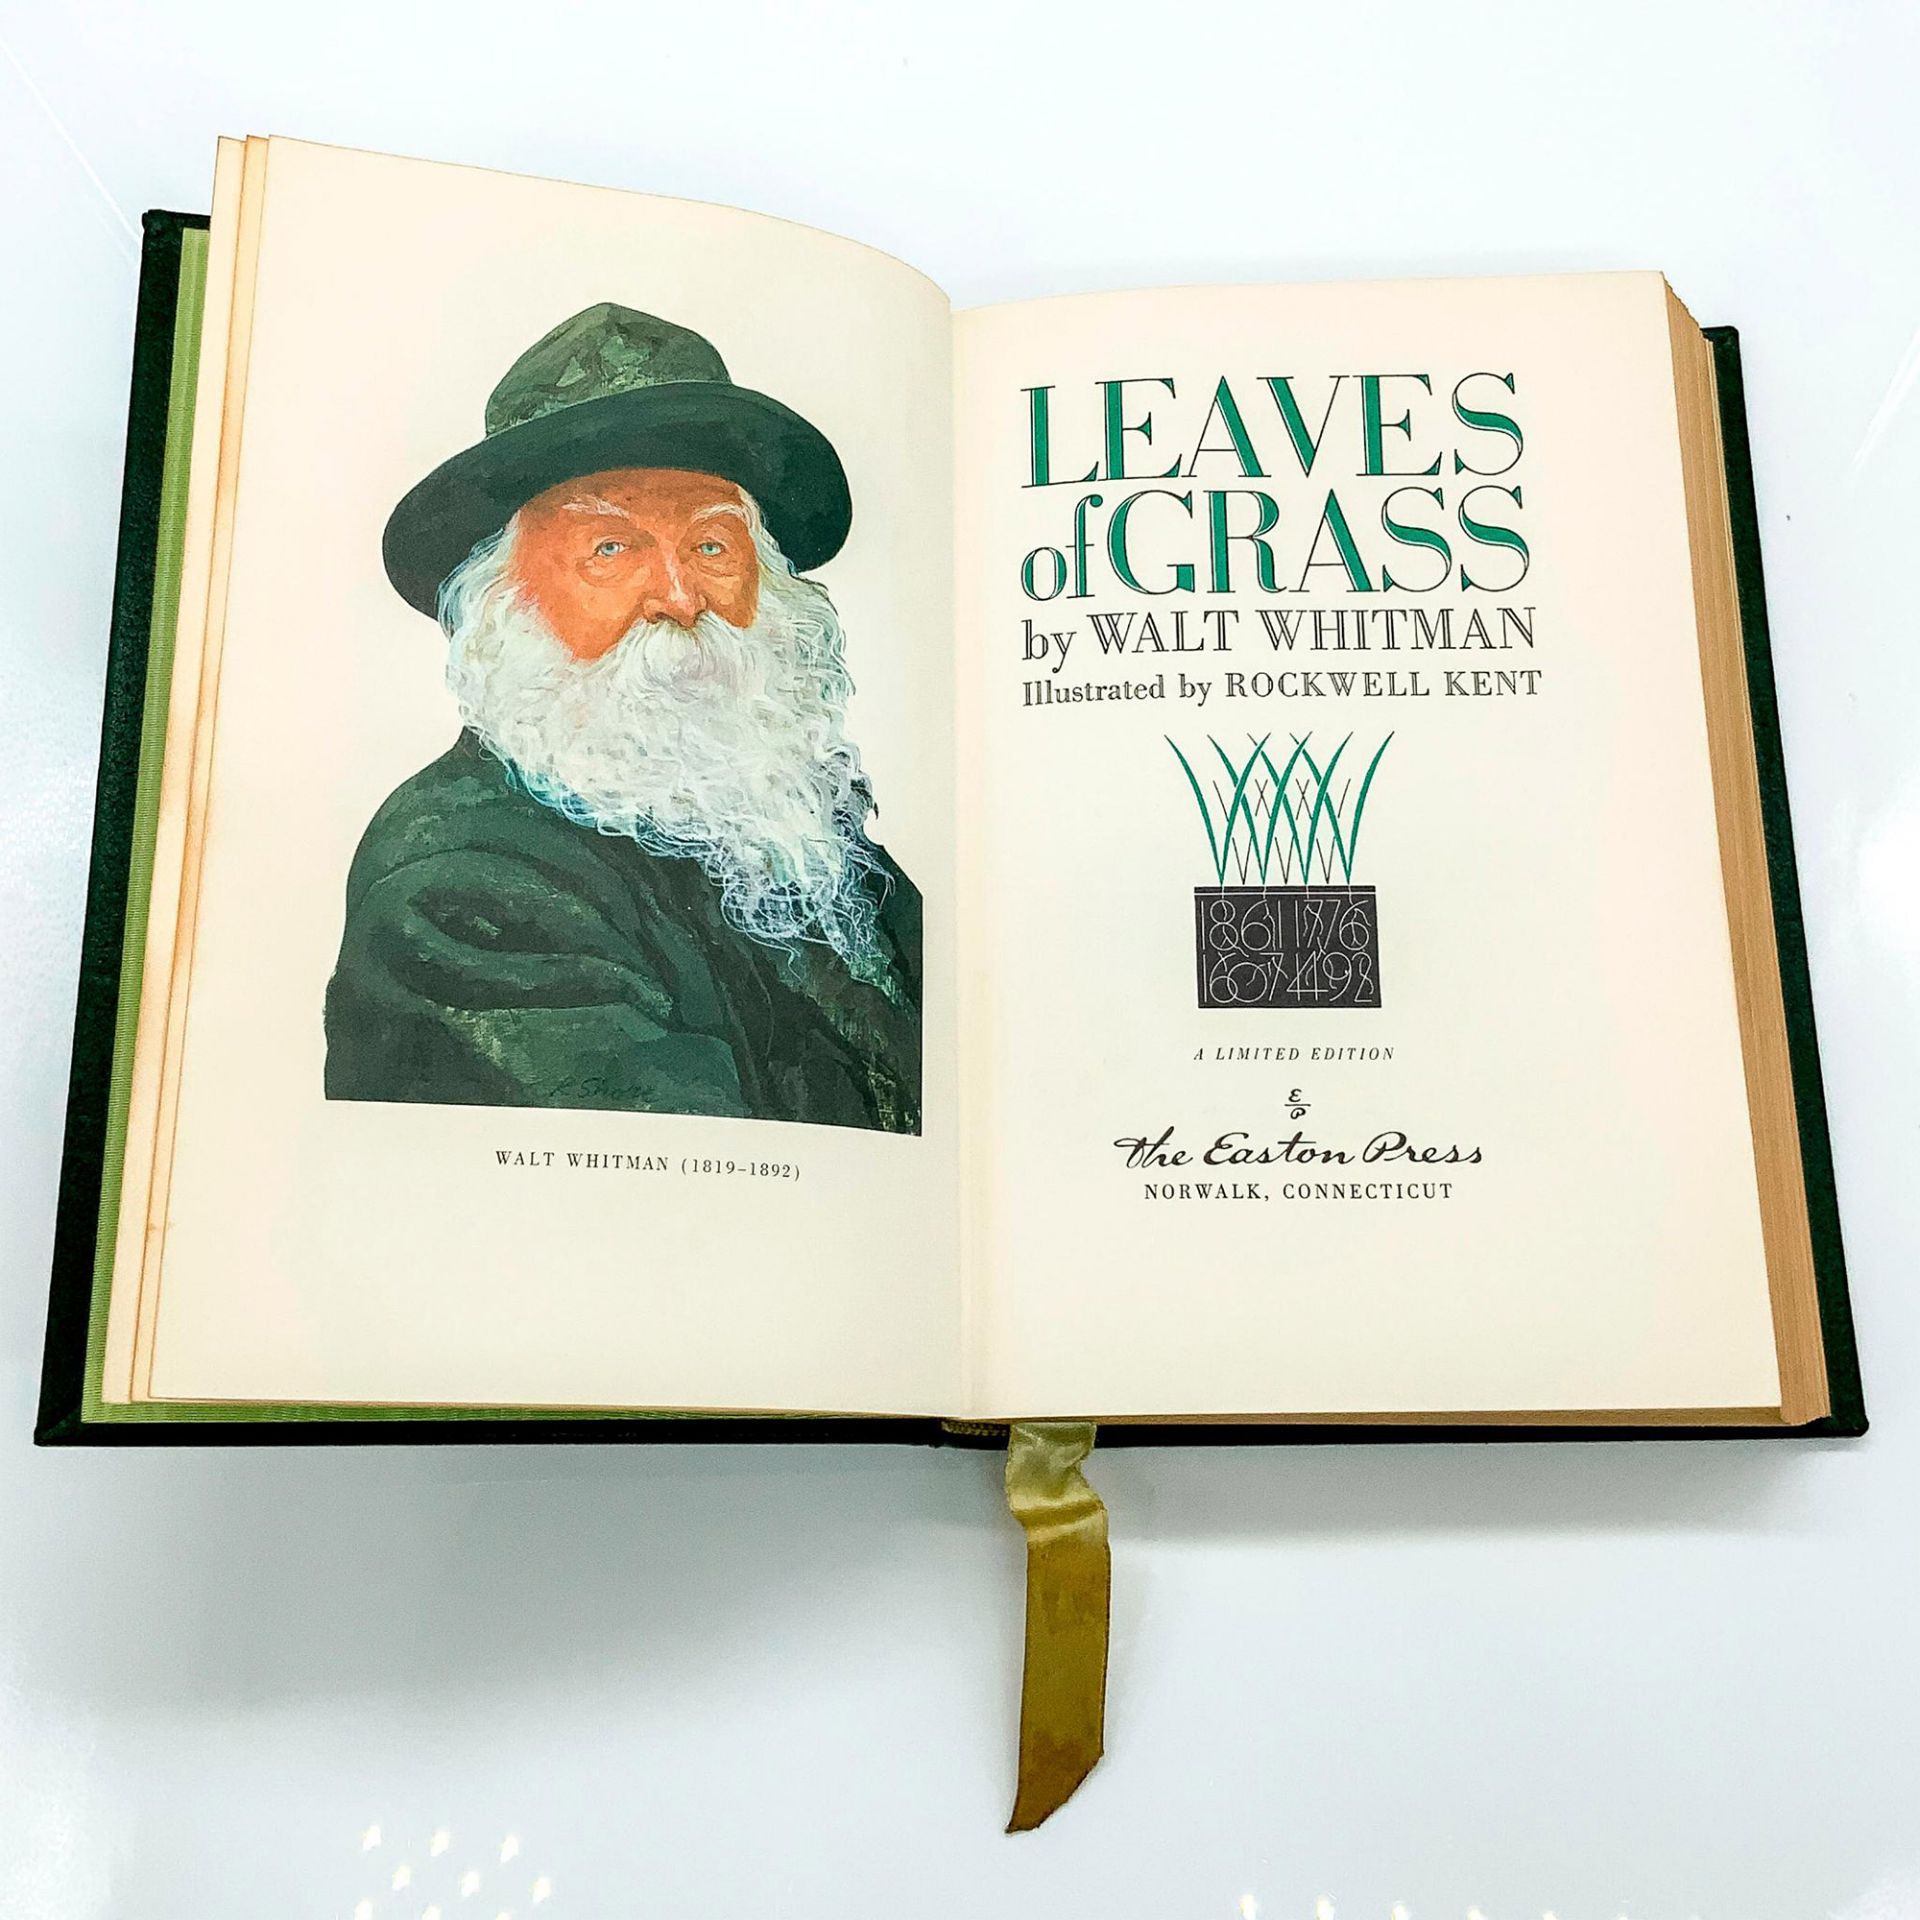 Leaves of Grass by Walt Whitman, Limited Edition Copy - Image 2 of 4